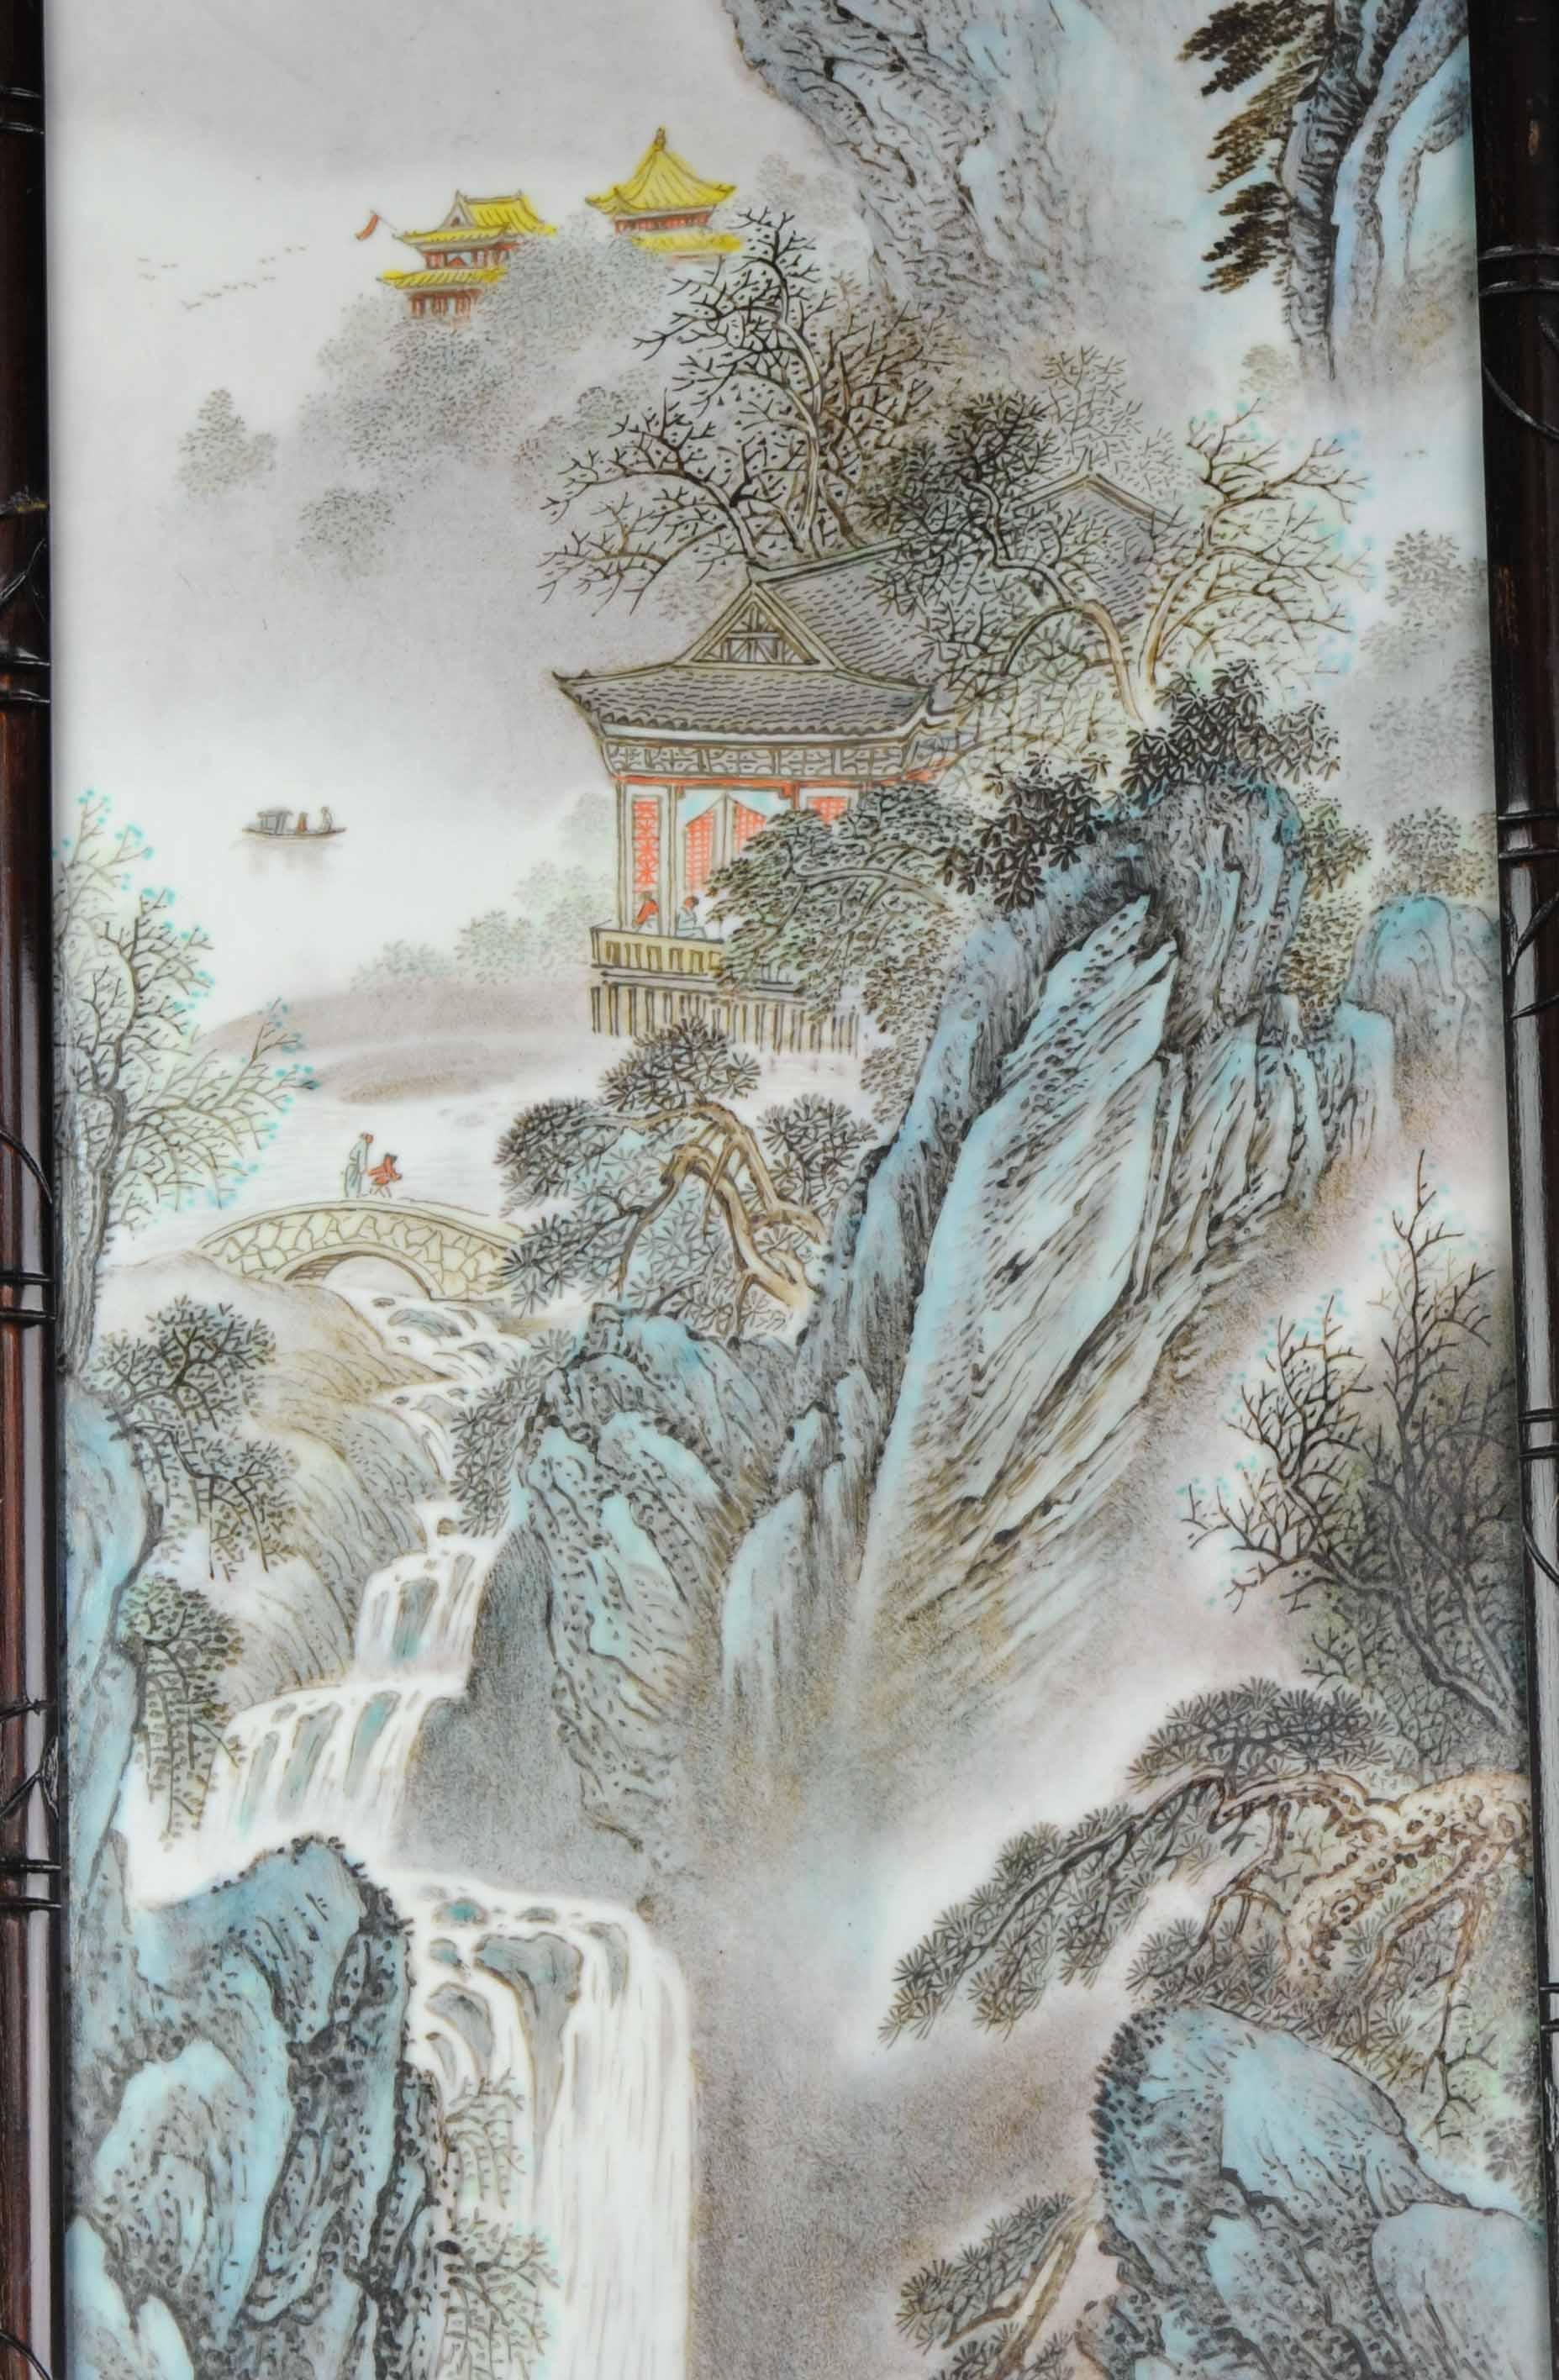 Lot of two polychrome porcelain plaques, decorated with waterfalls in a mountainous landscape. Dated 1987. Marked Wang Yeting. China. 
Its a copy of one of the zhushan friends

Dimensions: 112 x 31 cm.

Provenance: bought in Hong Kong, 1988

The